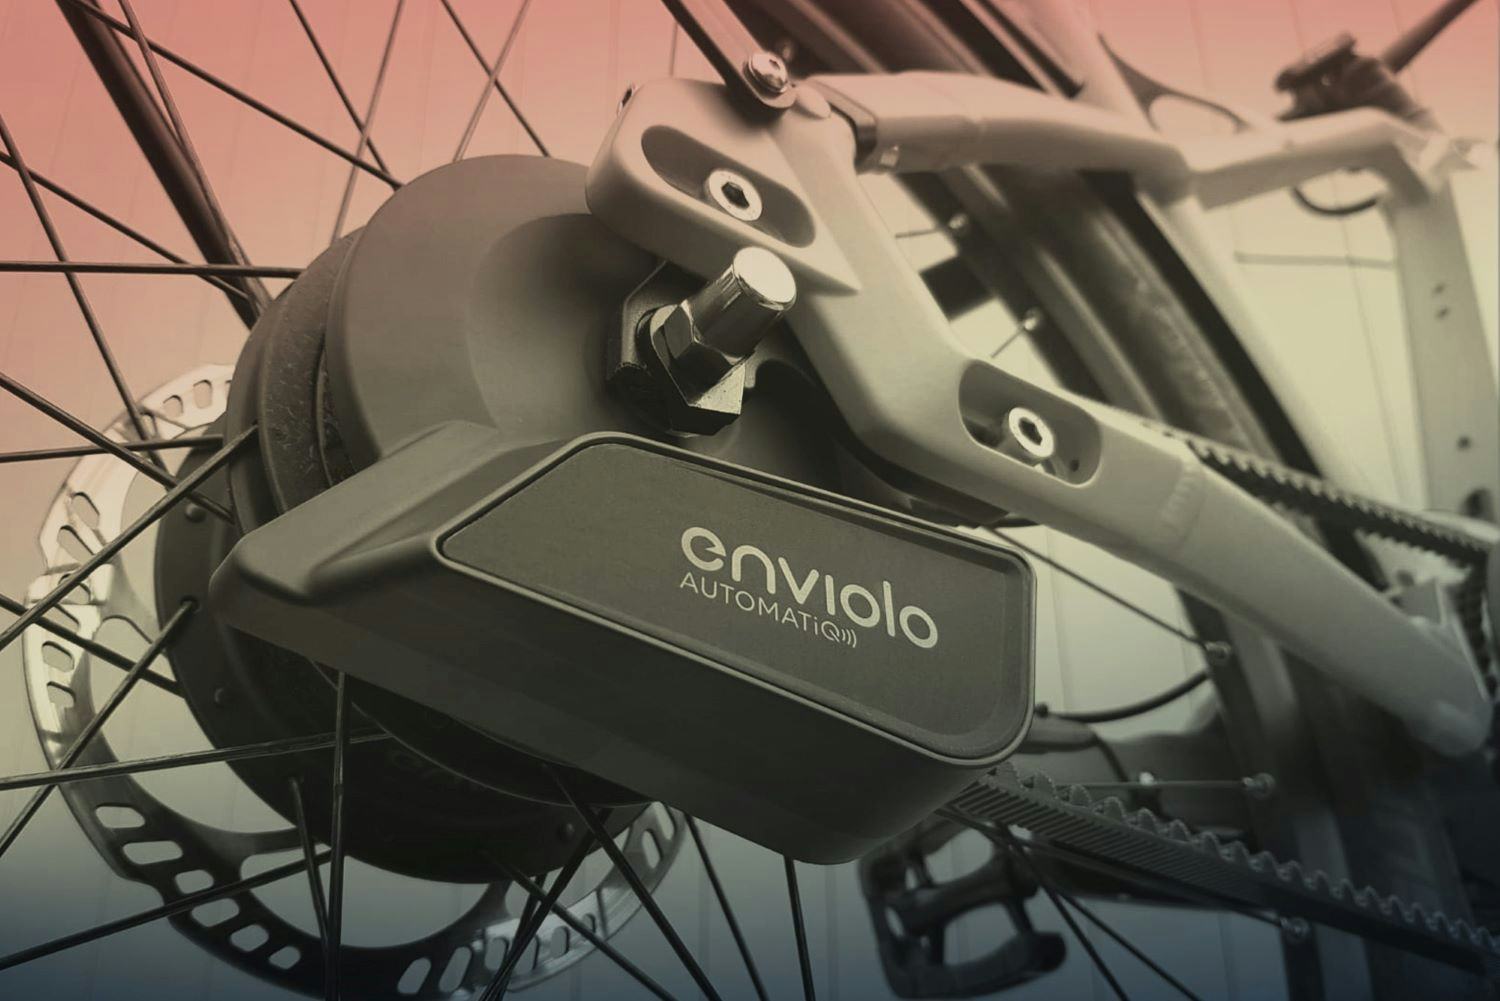 The market growth expectations for enviolo’s automatic shifting products are at least 20% per year. - Photo enviolo